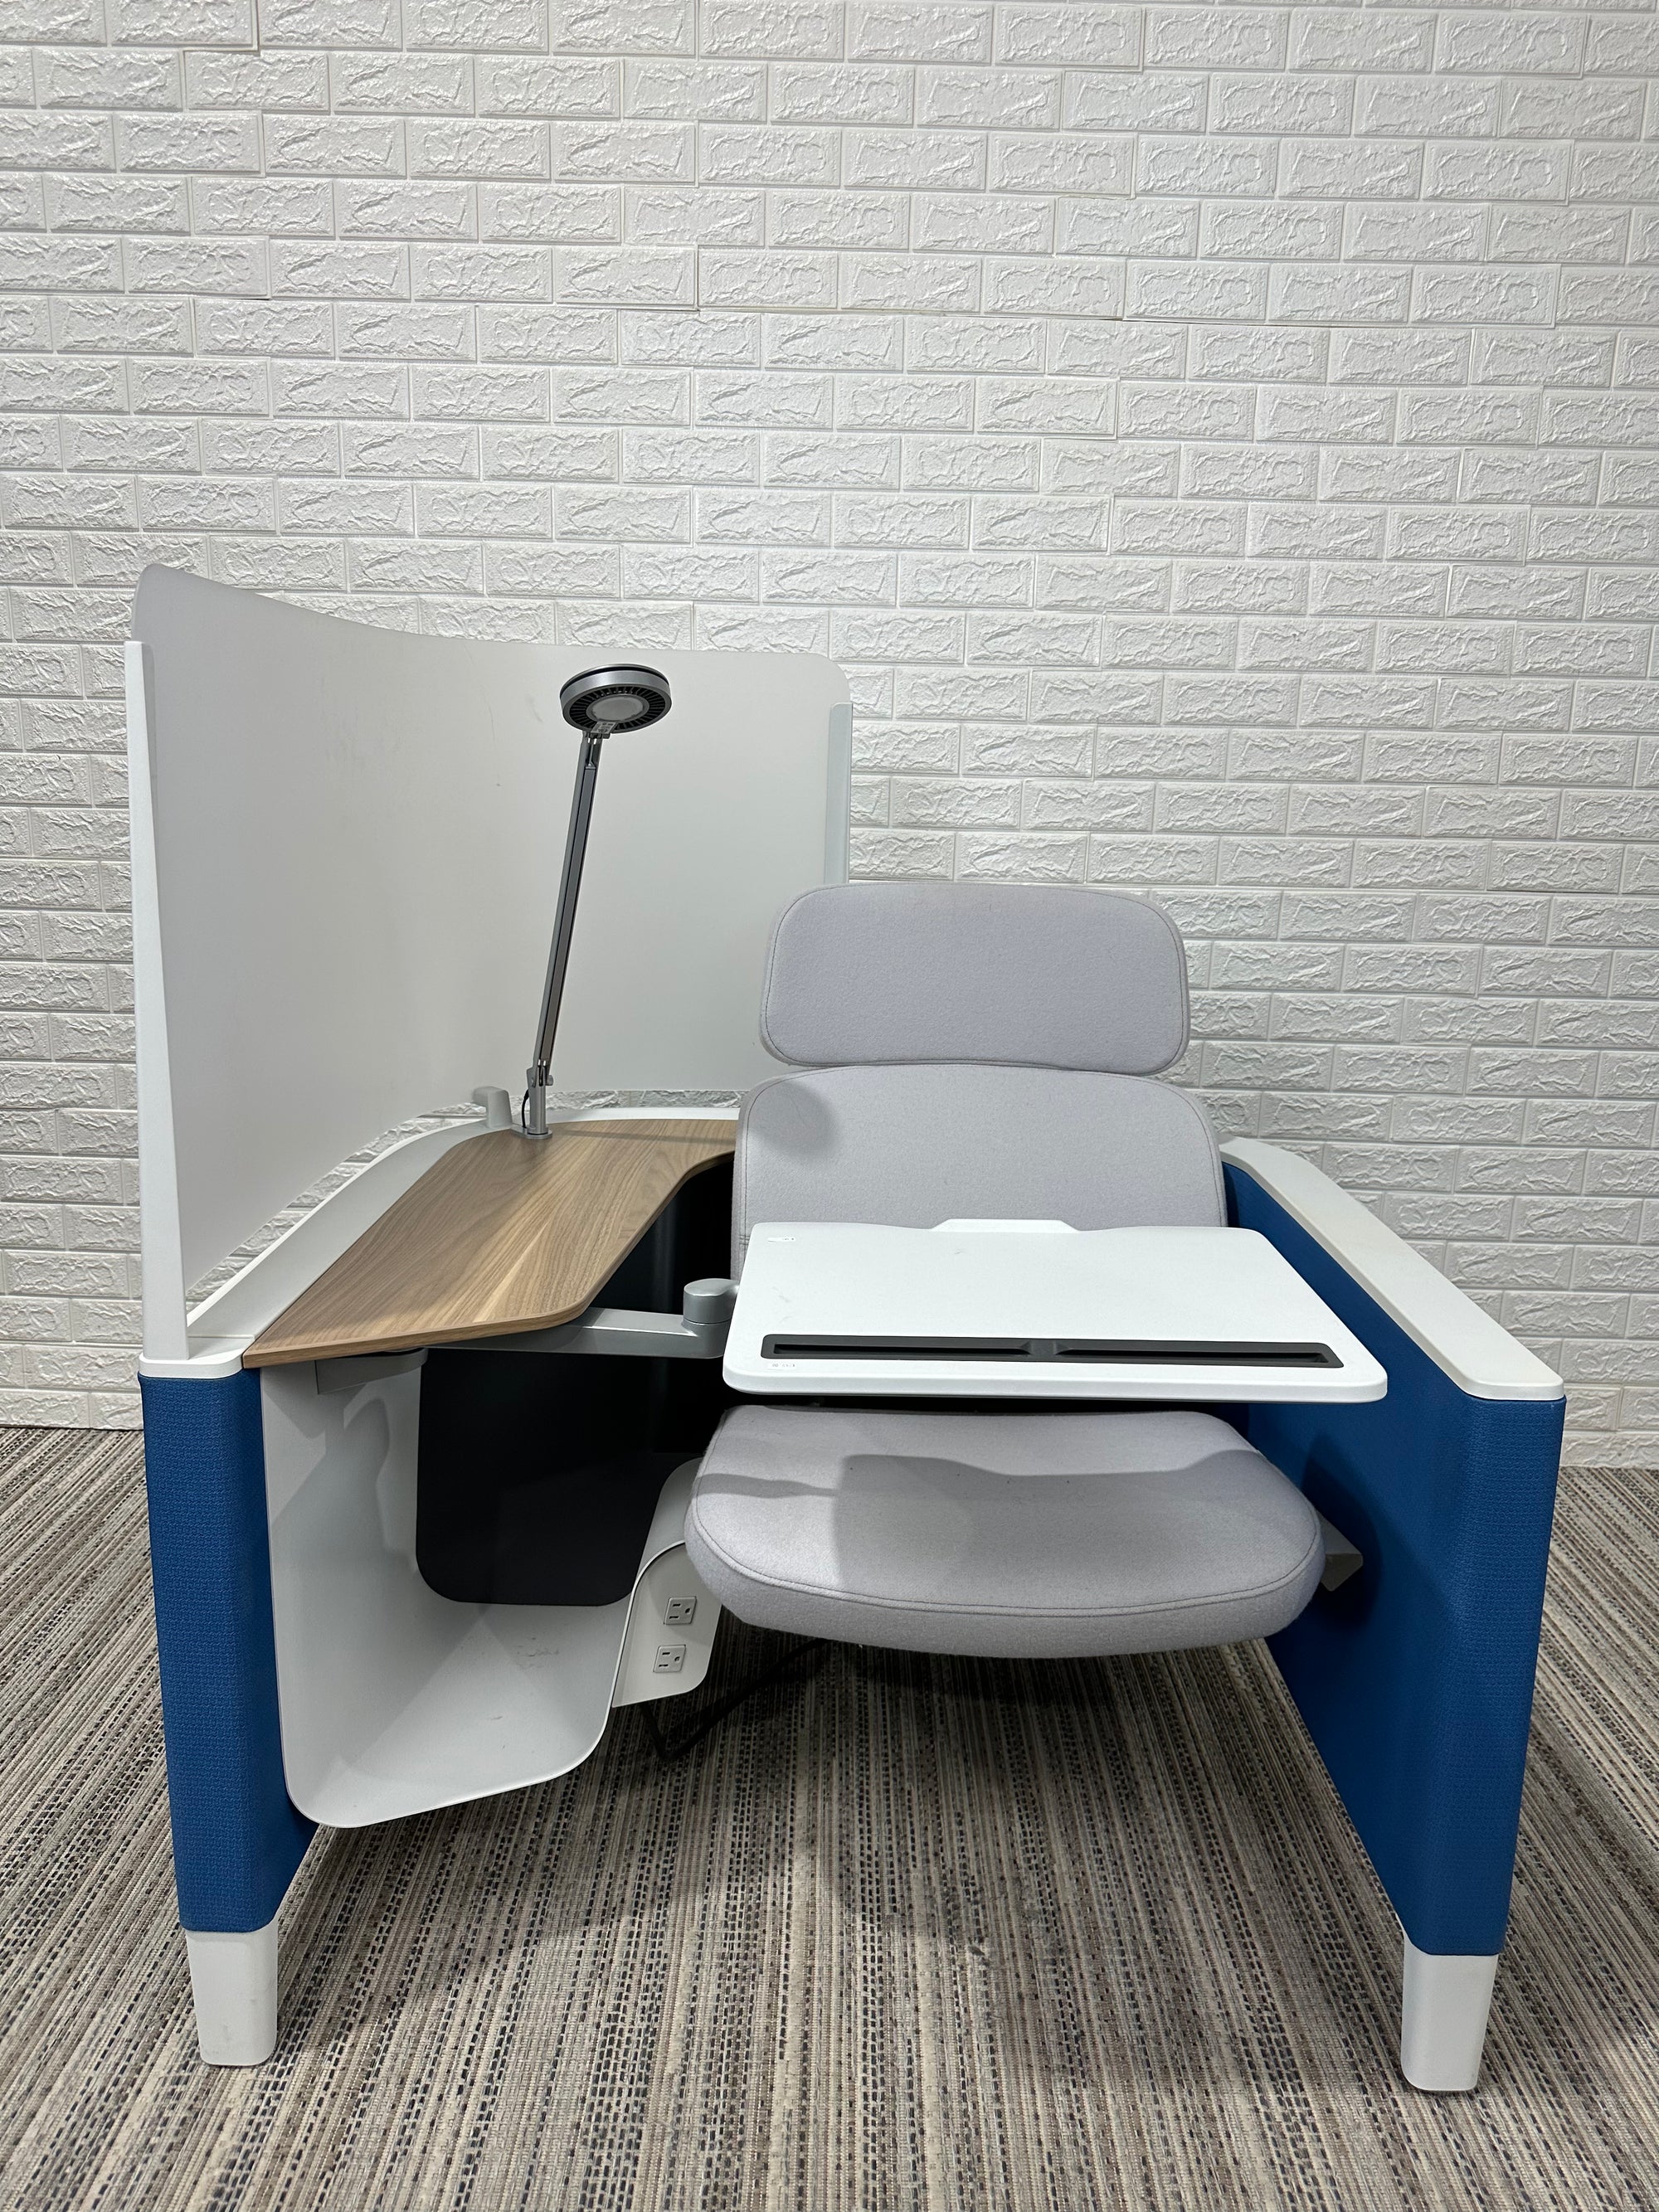 Pre-Owned Steelcase Brody - Duckys Office Furniture